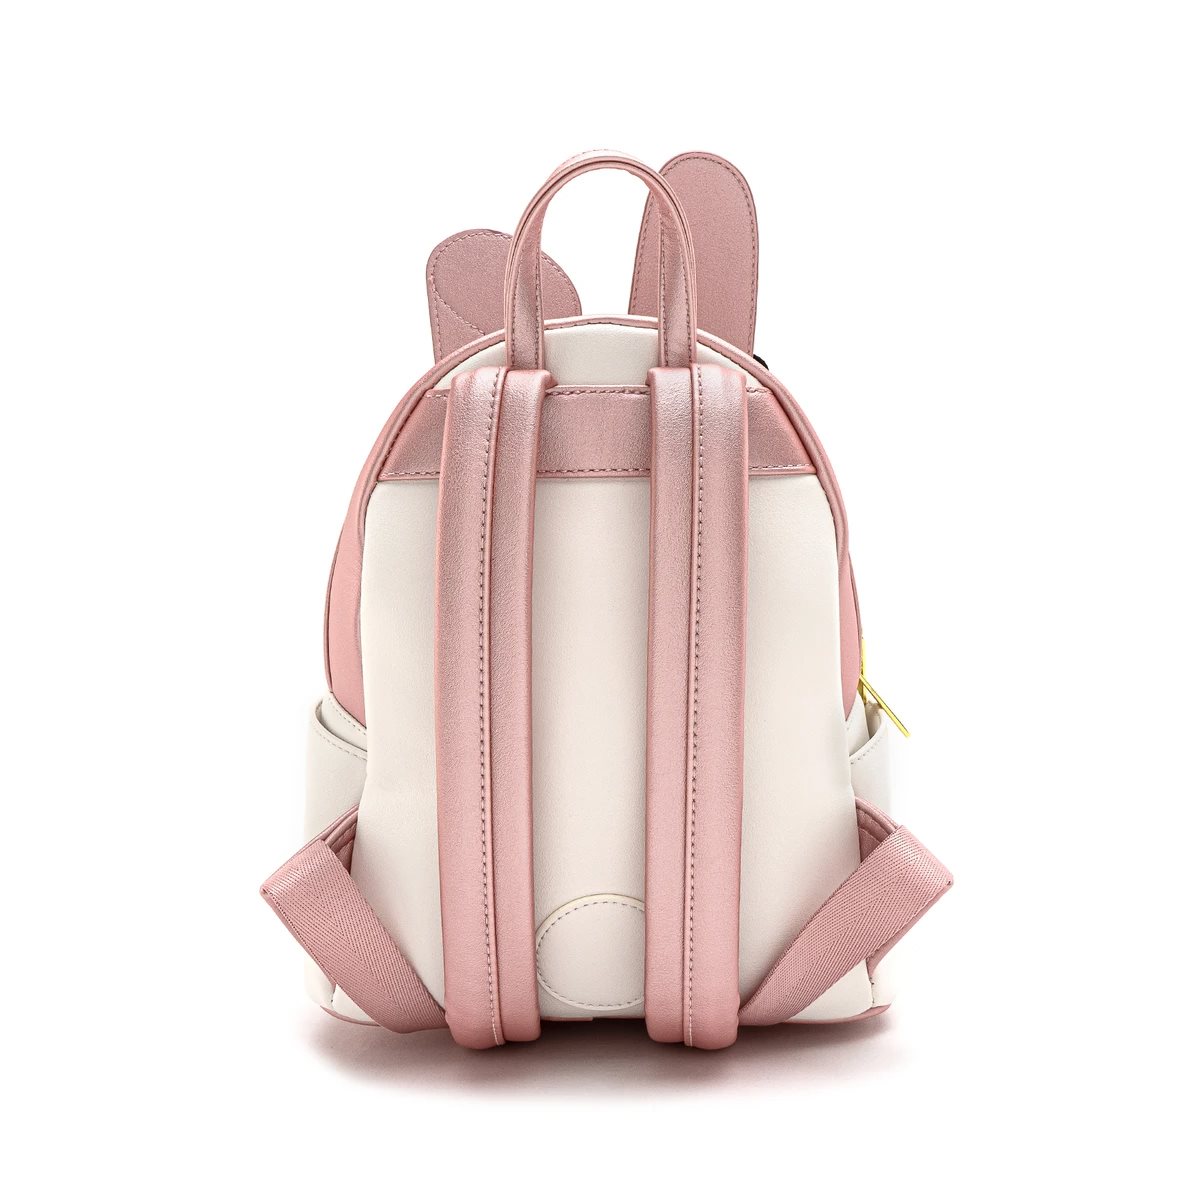 Sanrio My Melody Mini Backpack - Entertainment Earth